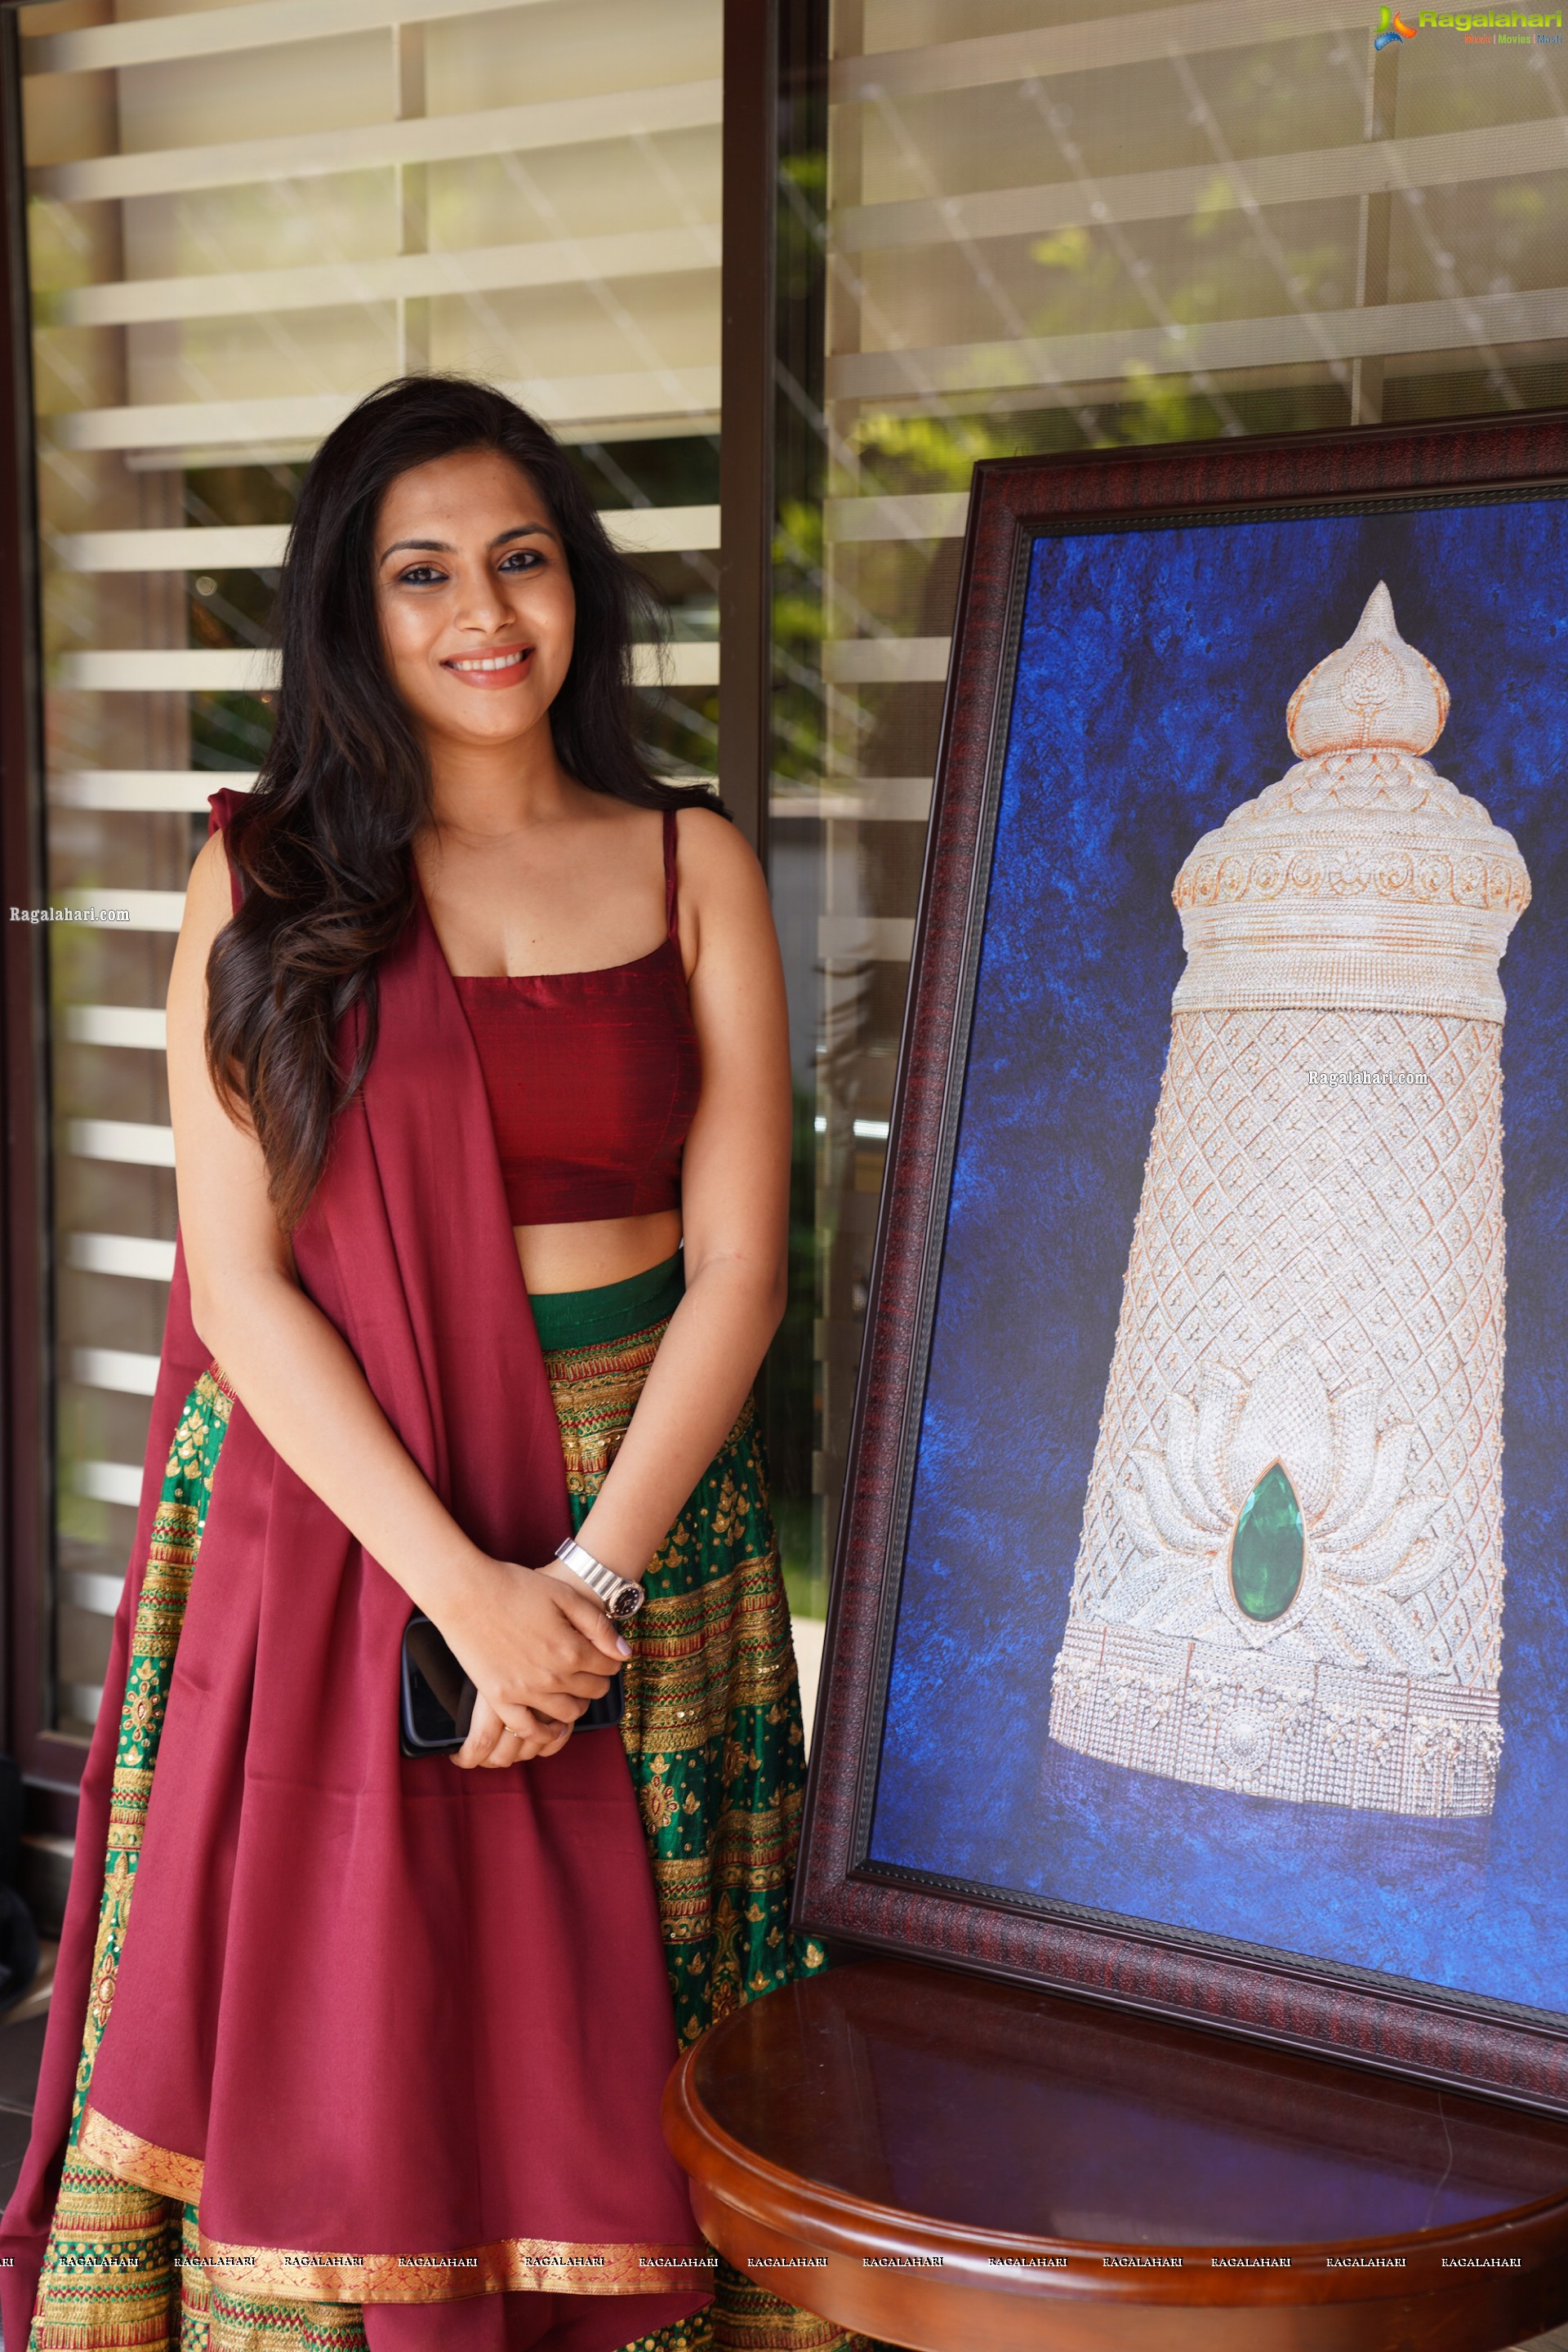 Kirtilals Trunk Show at The Jayanthi Ballal Store Mysore, Inaugurated by Sonu Gowda